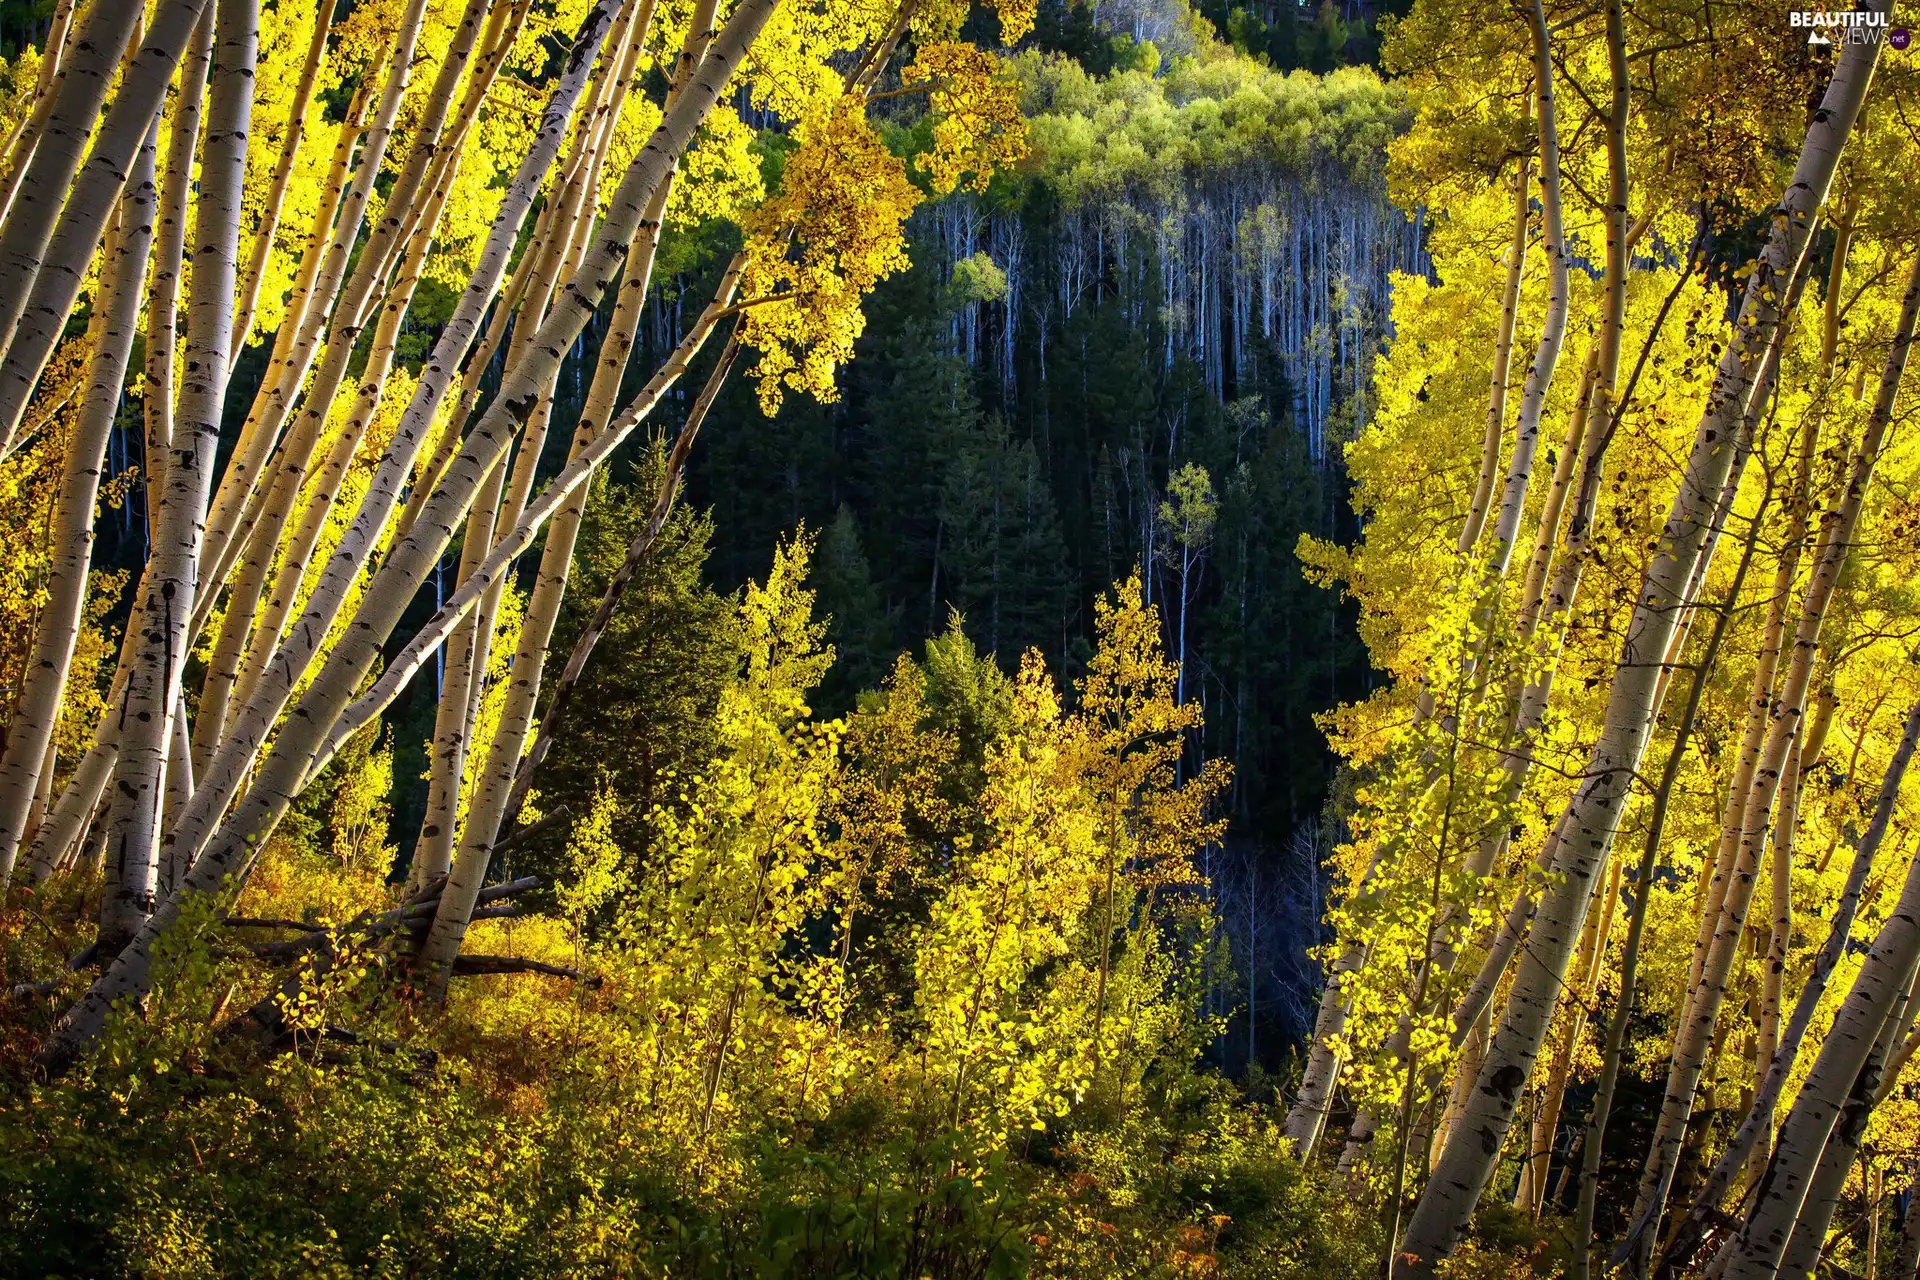 The United States, birch, White River National Forest, State of Colorado